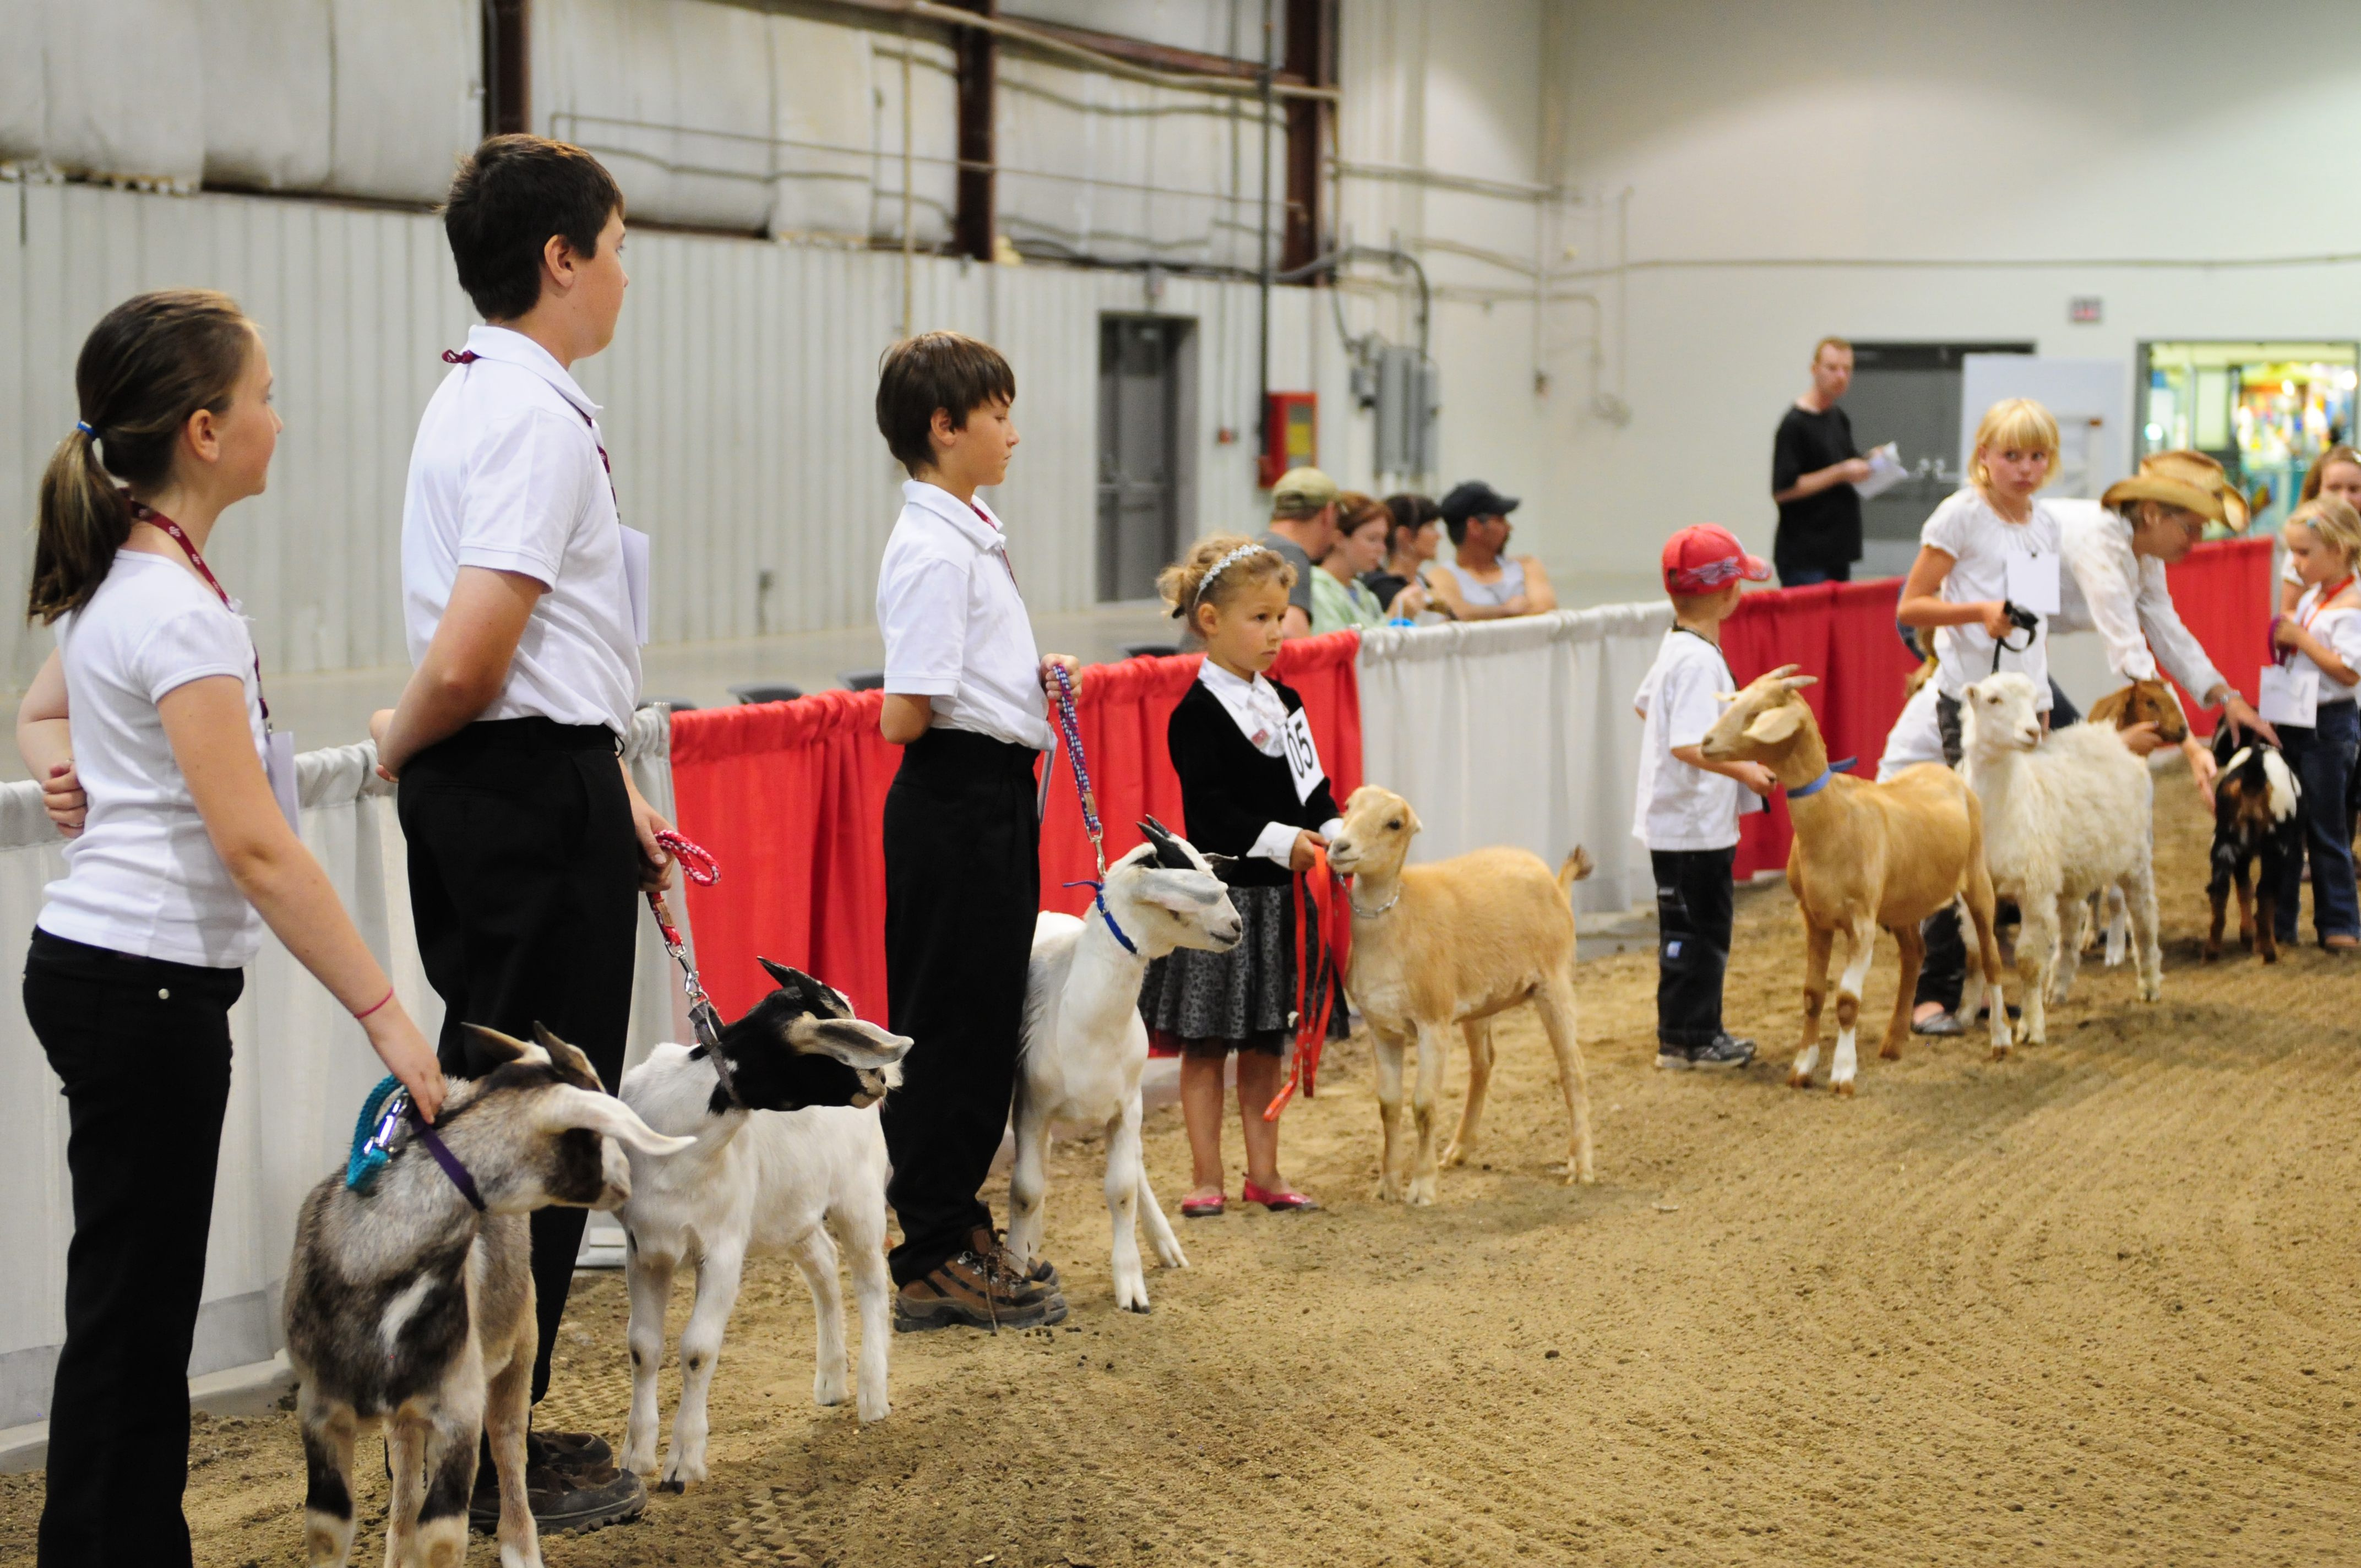 GOAT SHOW- Participants show off their little goats during the goat show in the Prairie Pavilion Thursday afternoon as part of Westerner Days.